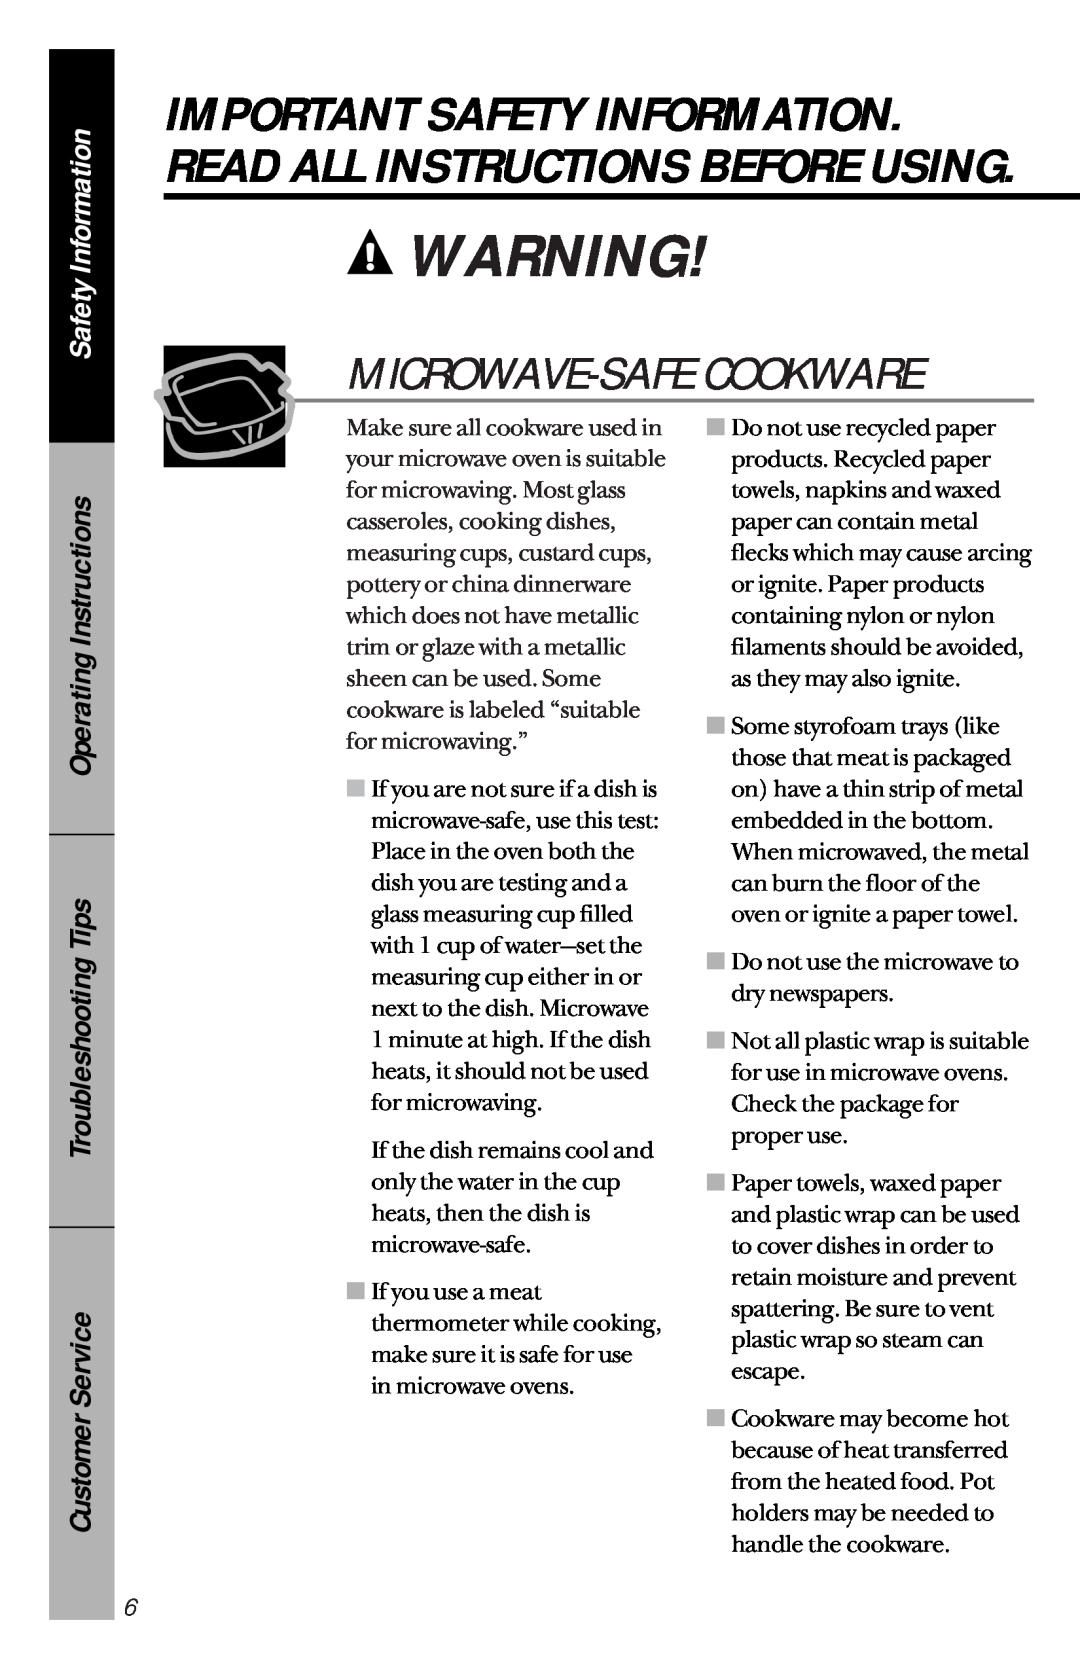 GE je1540 Microwave-Safecookware, Safety Information, Operating Instructions Troubleshooting Tips, Customer Service 